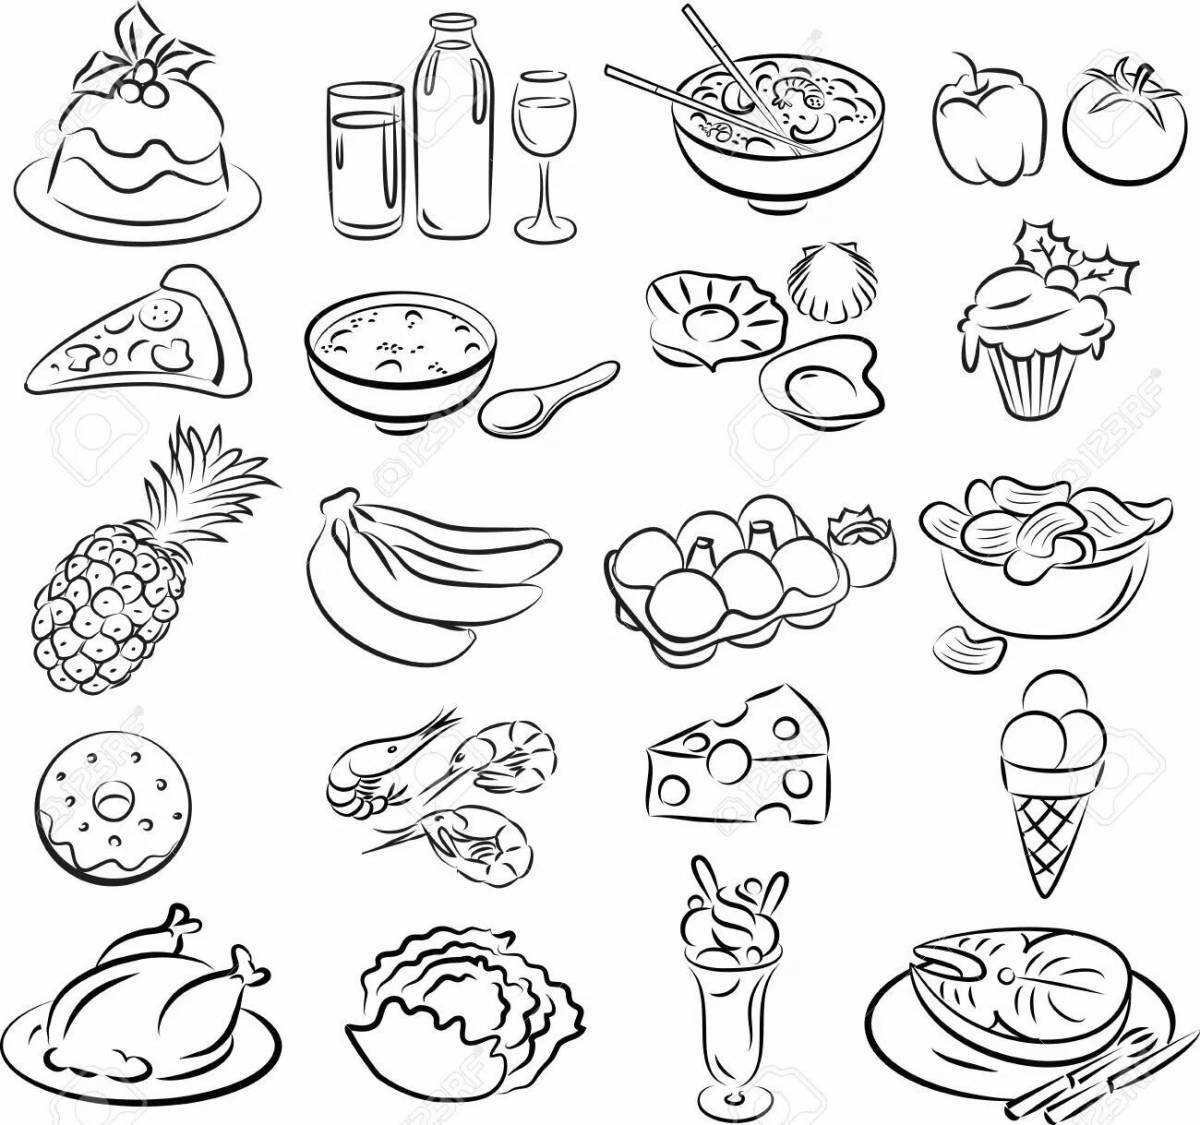 Appetizing healthy food coloring book for kids